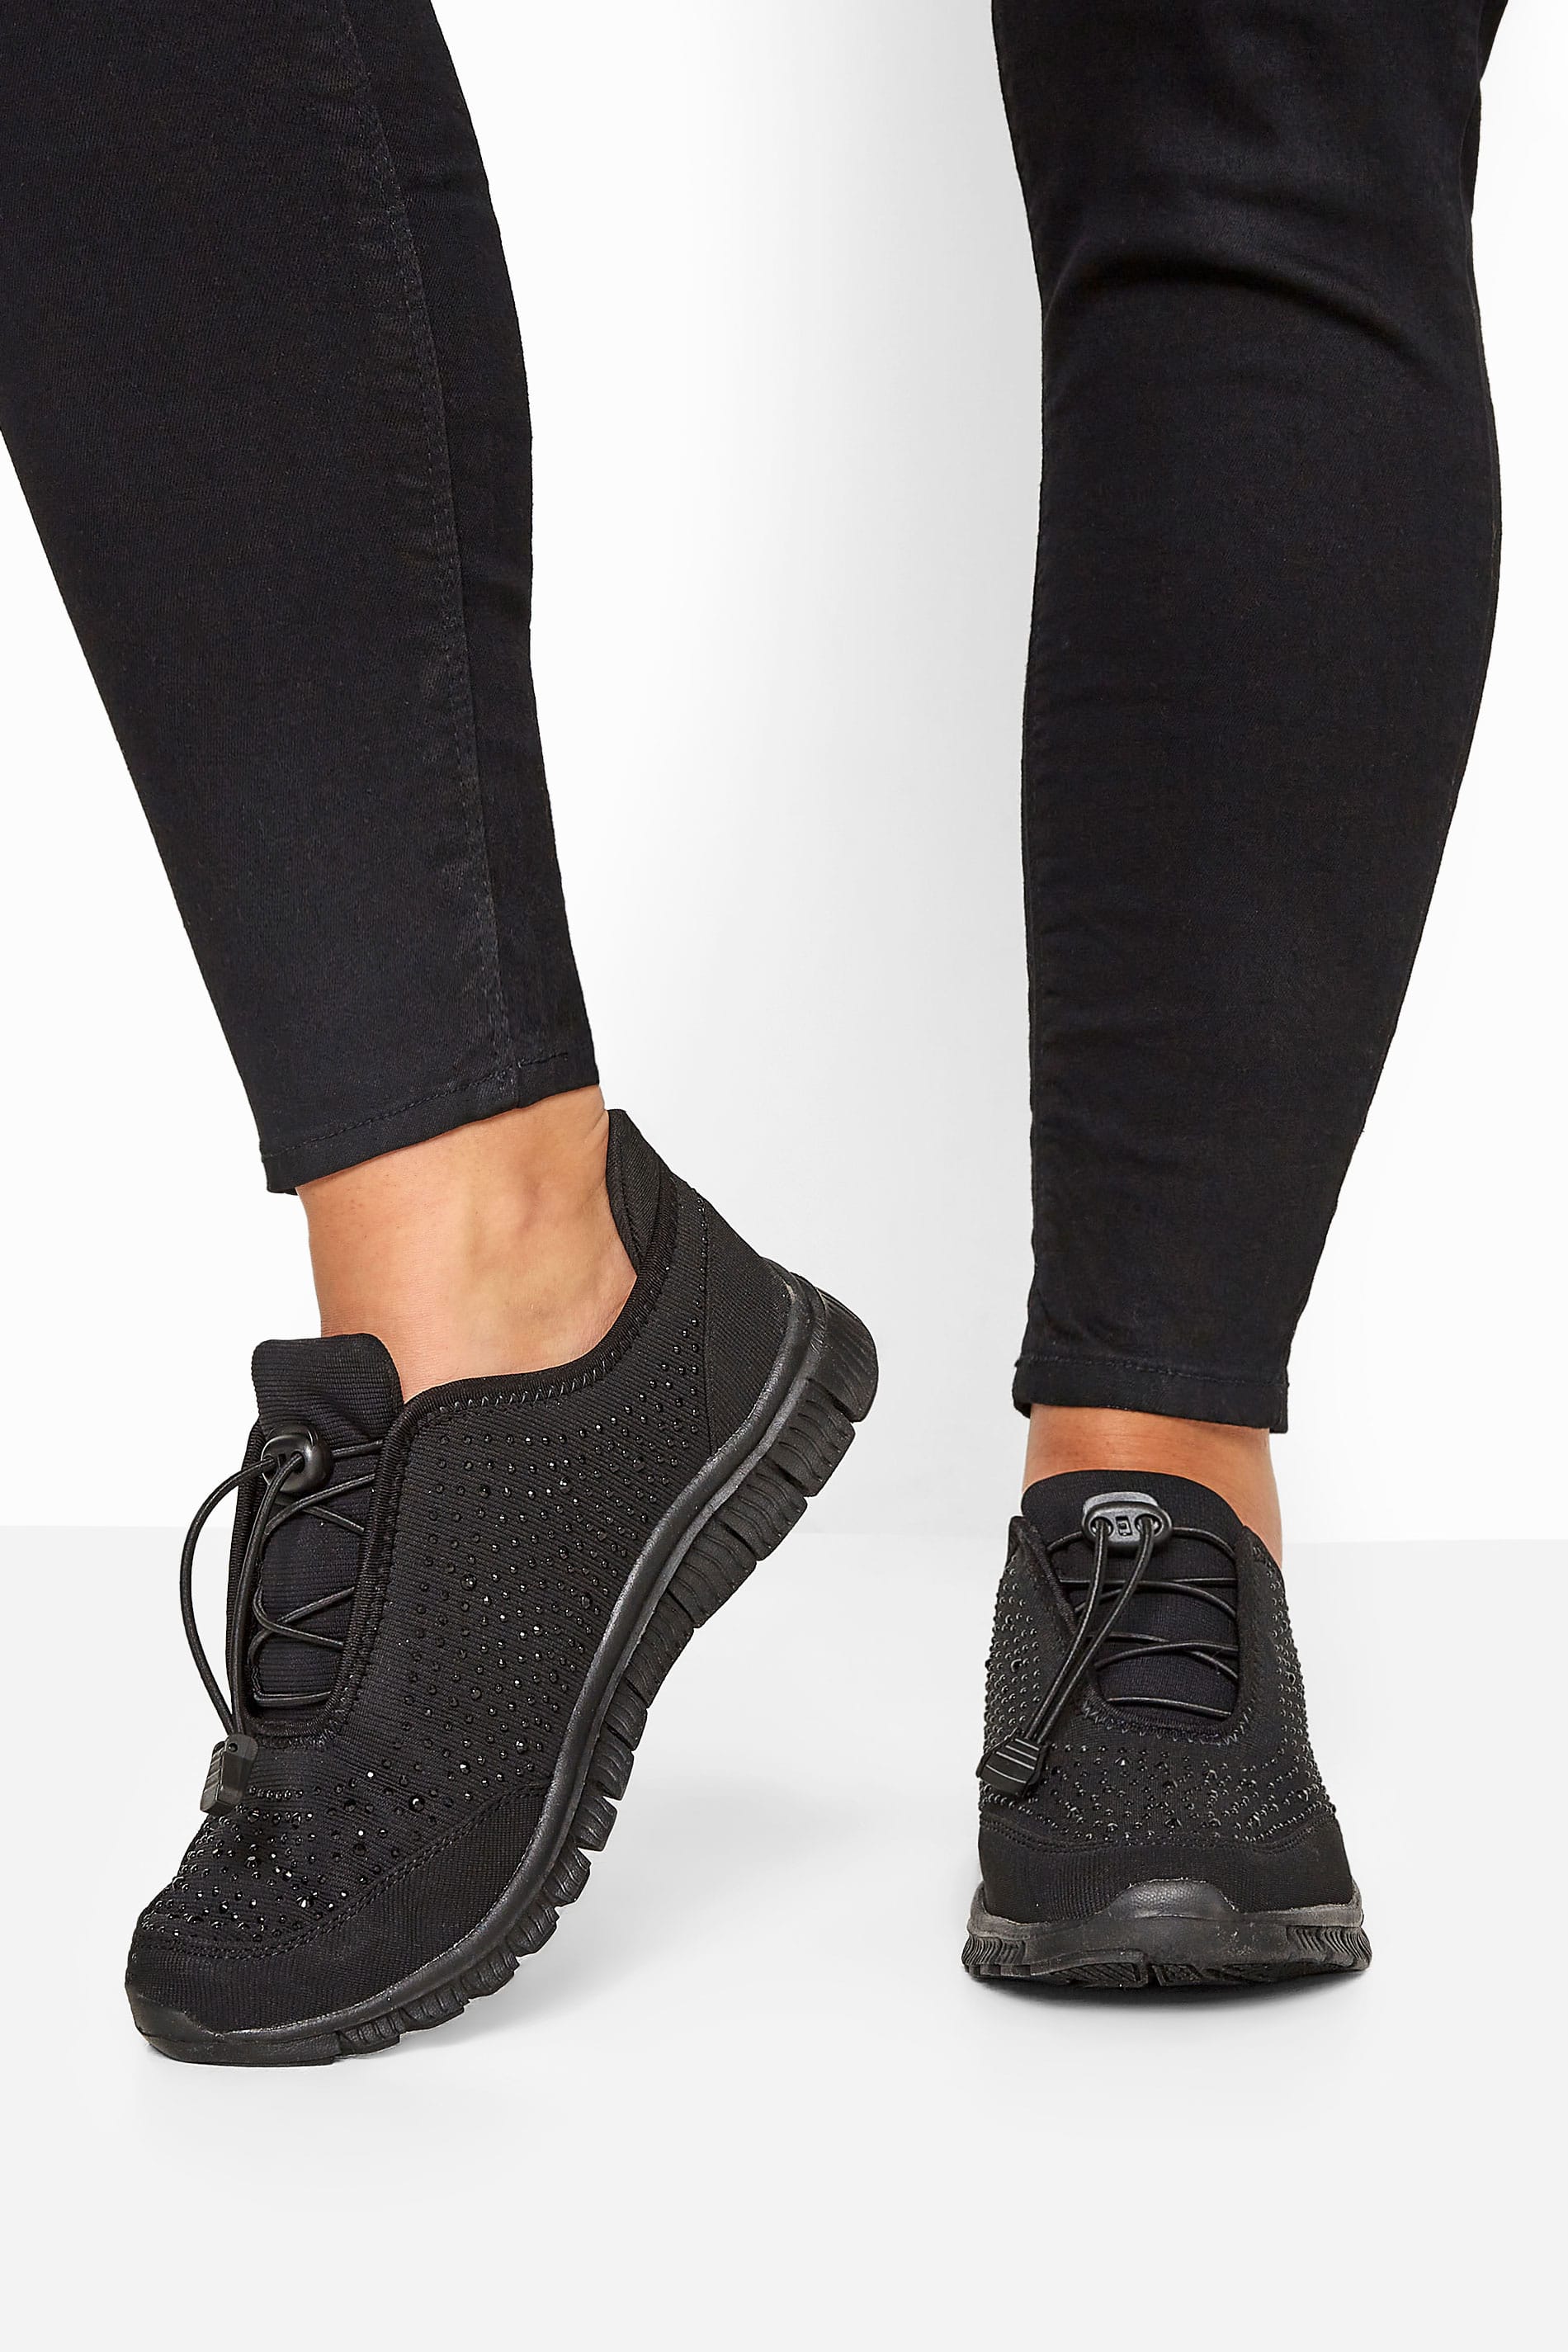 Black Embellished Drawcord Trainers In Wide E Fit & Extra Wide EEE Fit 1